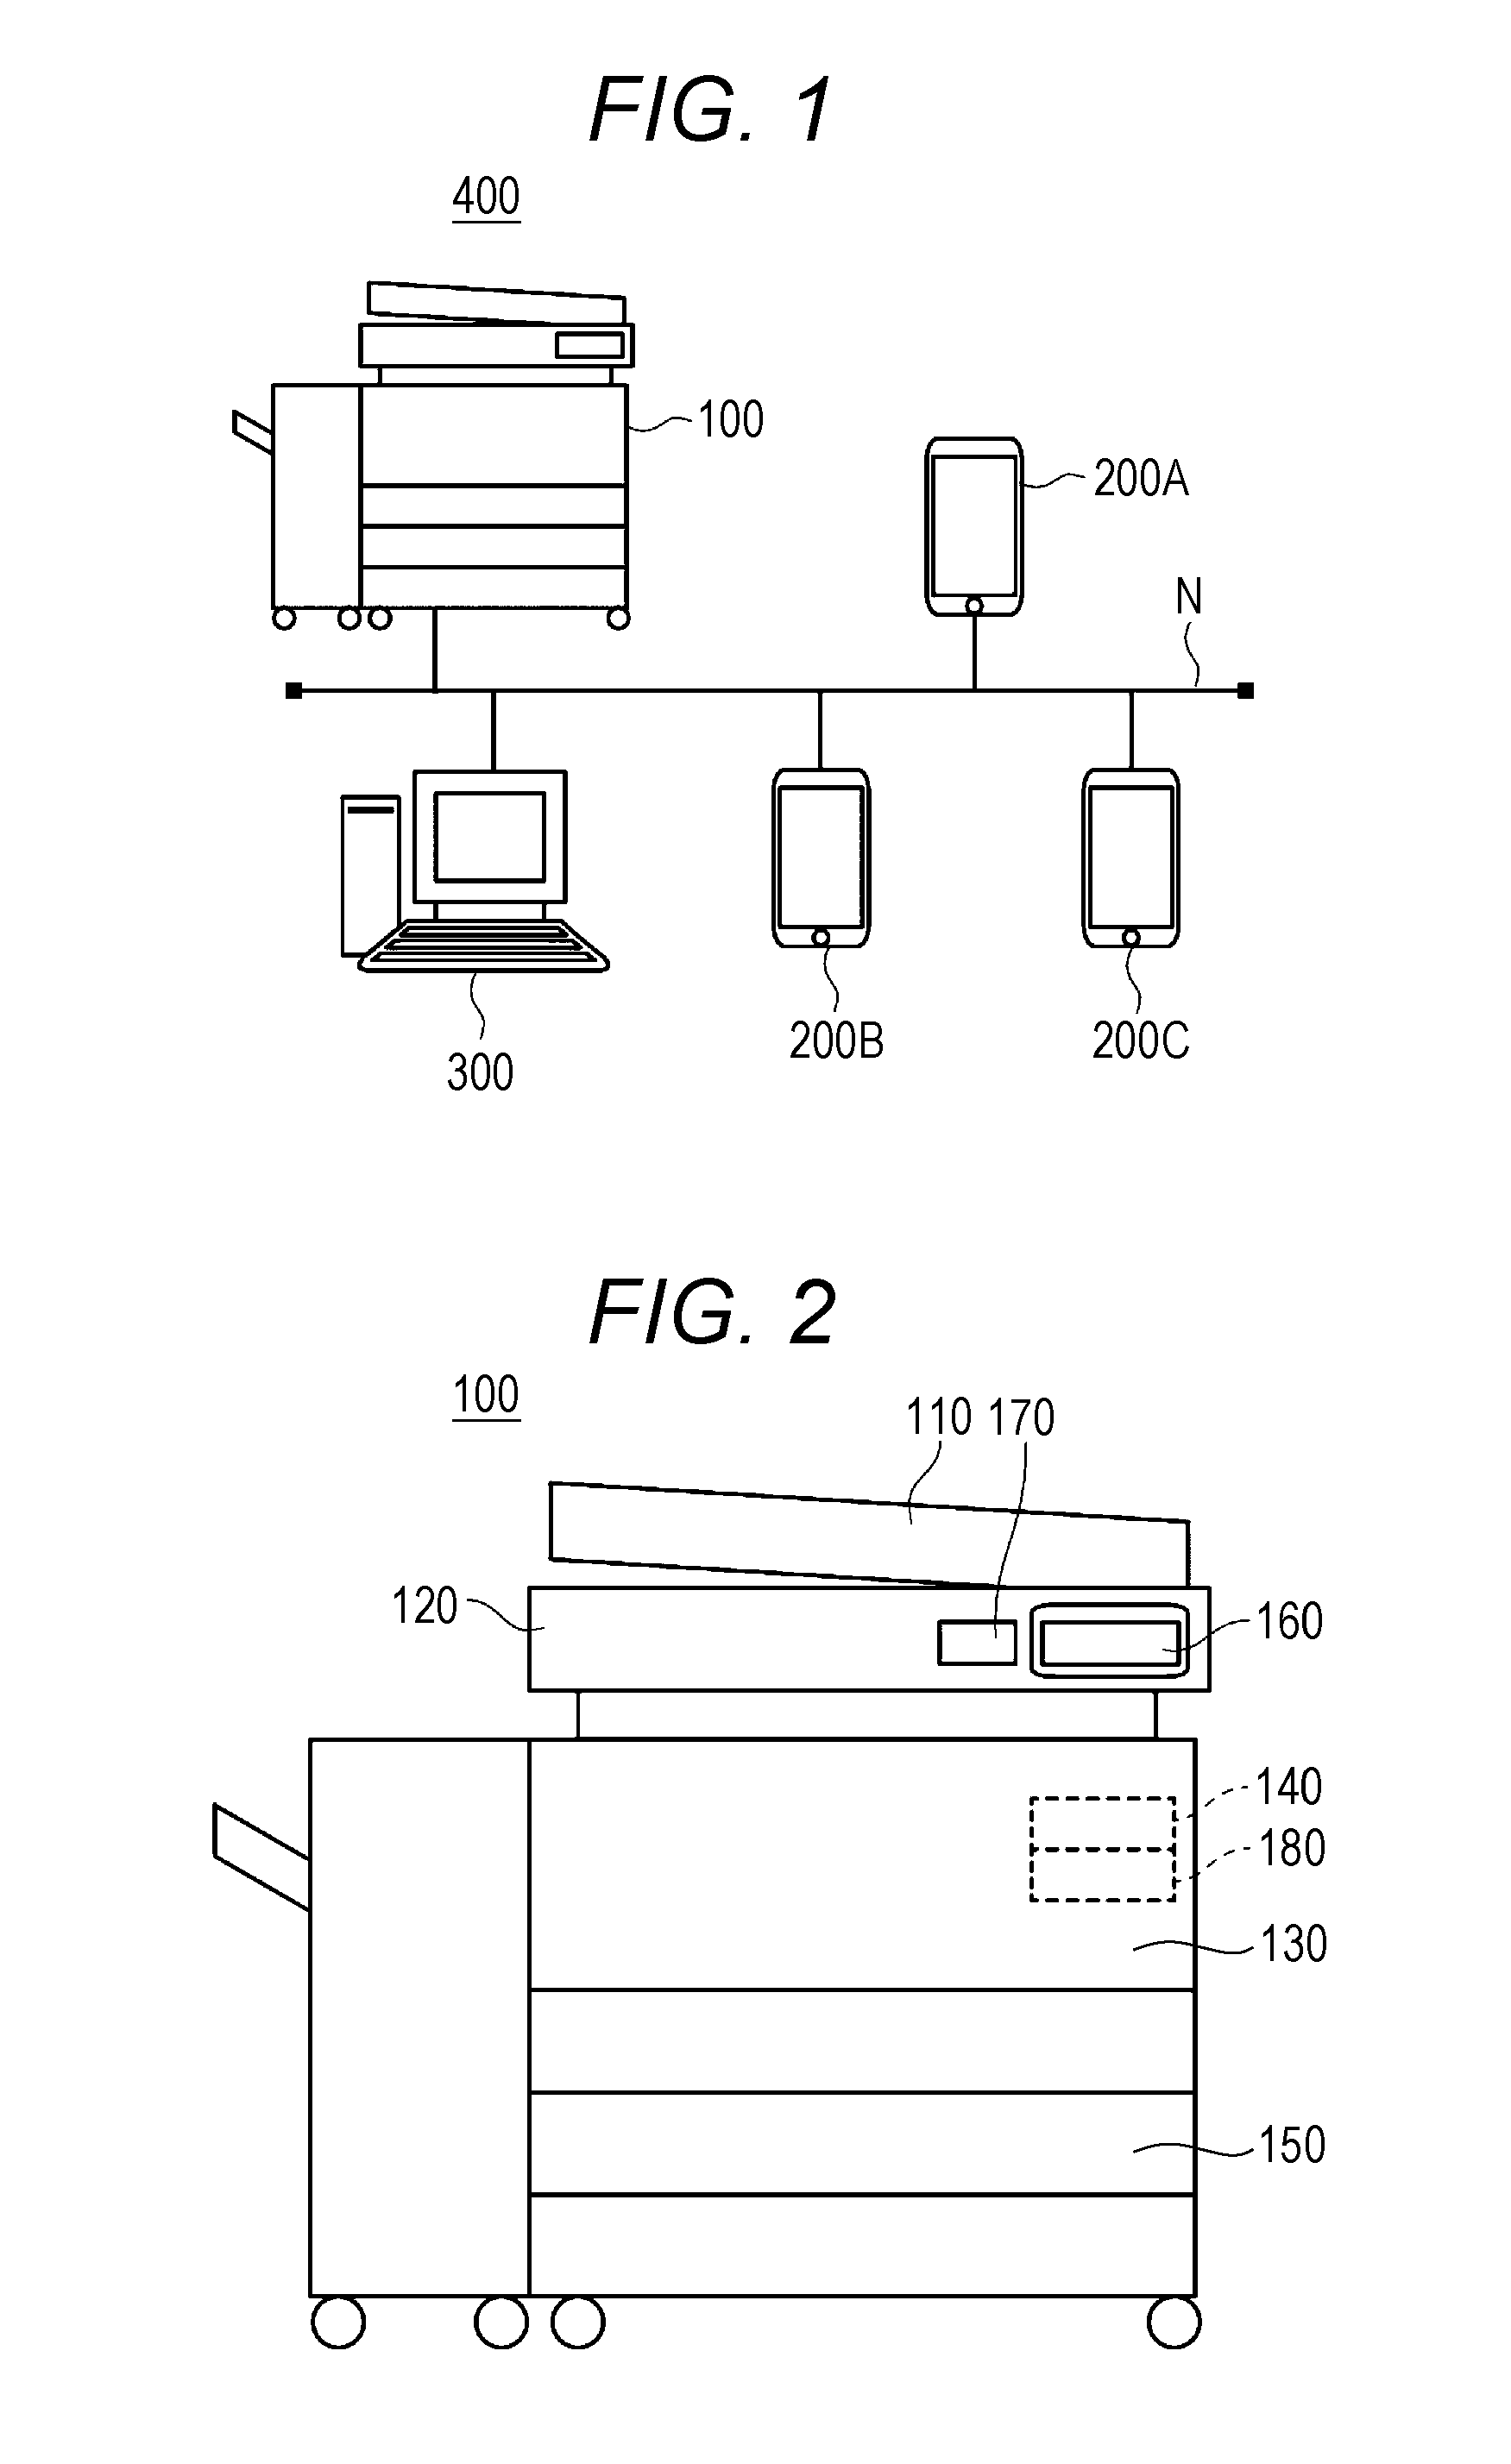 Operation display system, operation display device, and operation display program